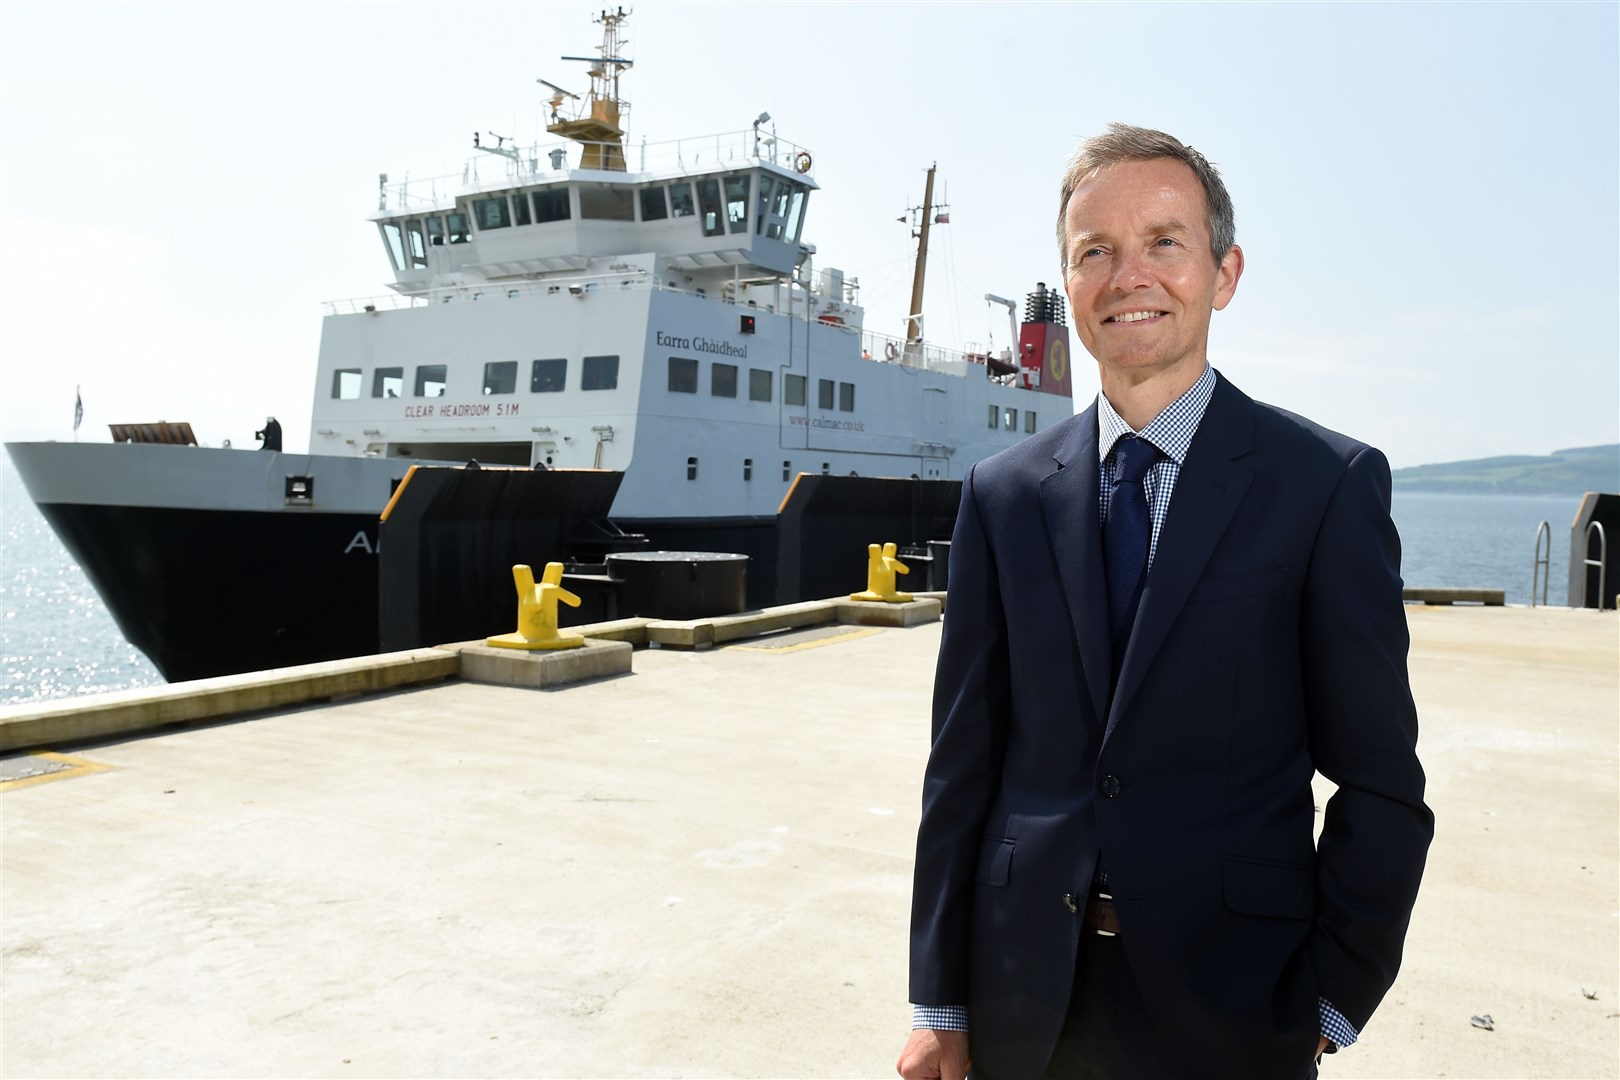 CalMac managing director Robbie Drummond: “This small initiative aims to make what is already a very difficult time that little bit easier for those affected by this conflict.”